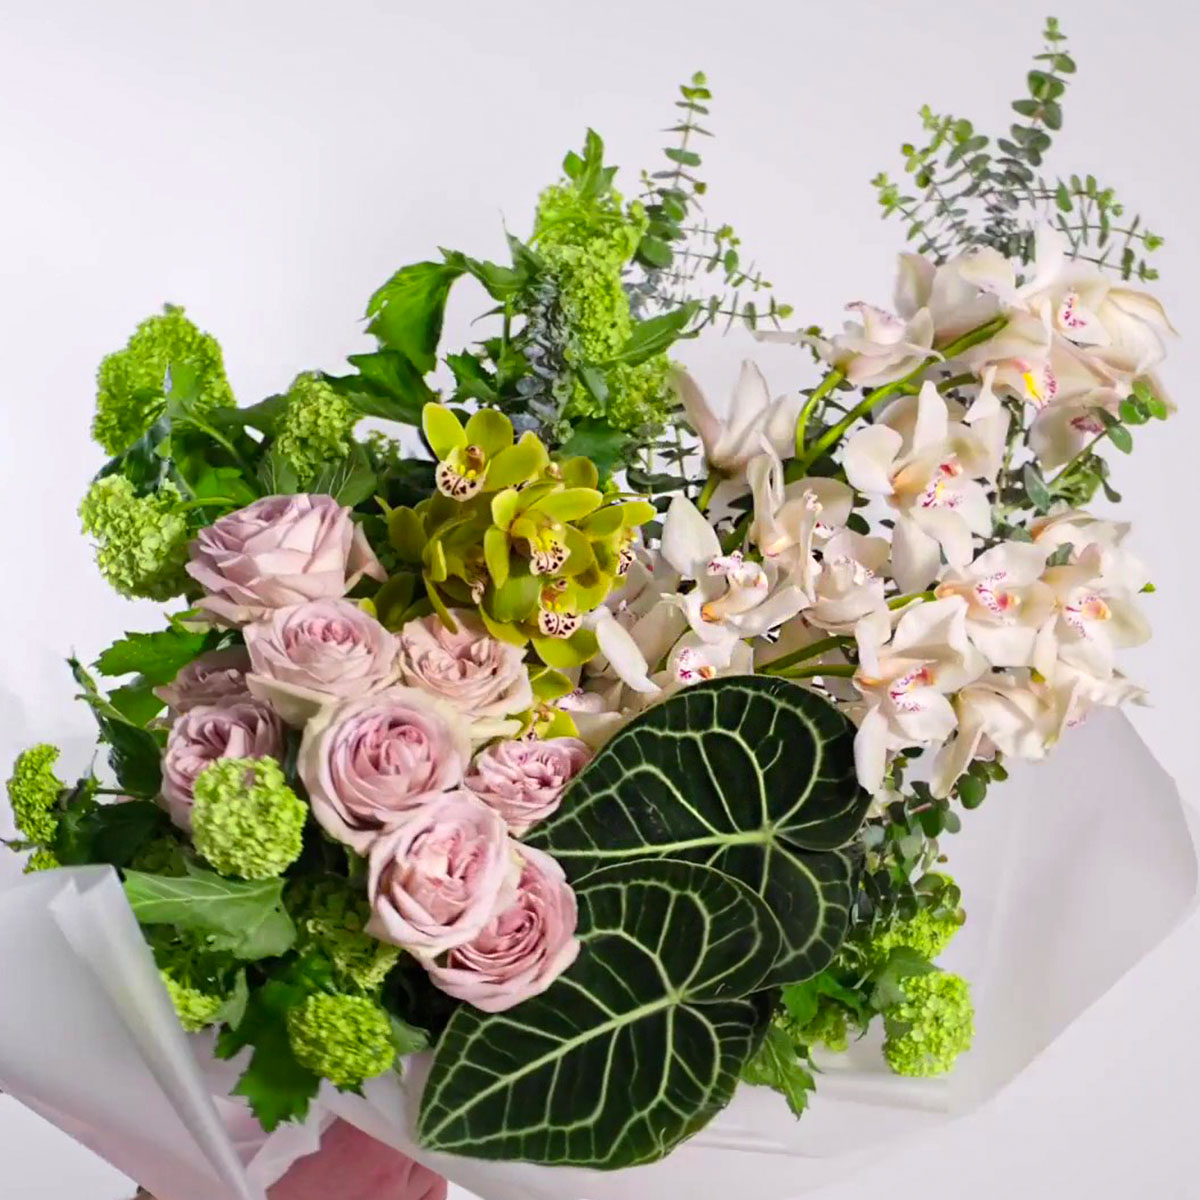 learn-the-tricks-of-cymbidium-design-with-joseph-massie-the-tropical-green-bouquet-featured